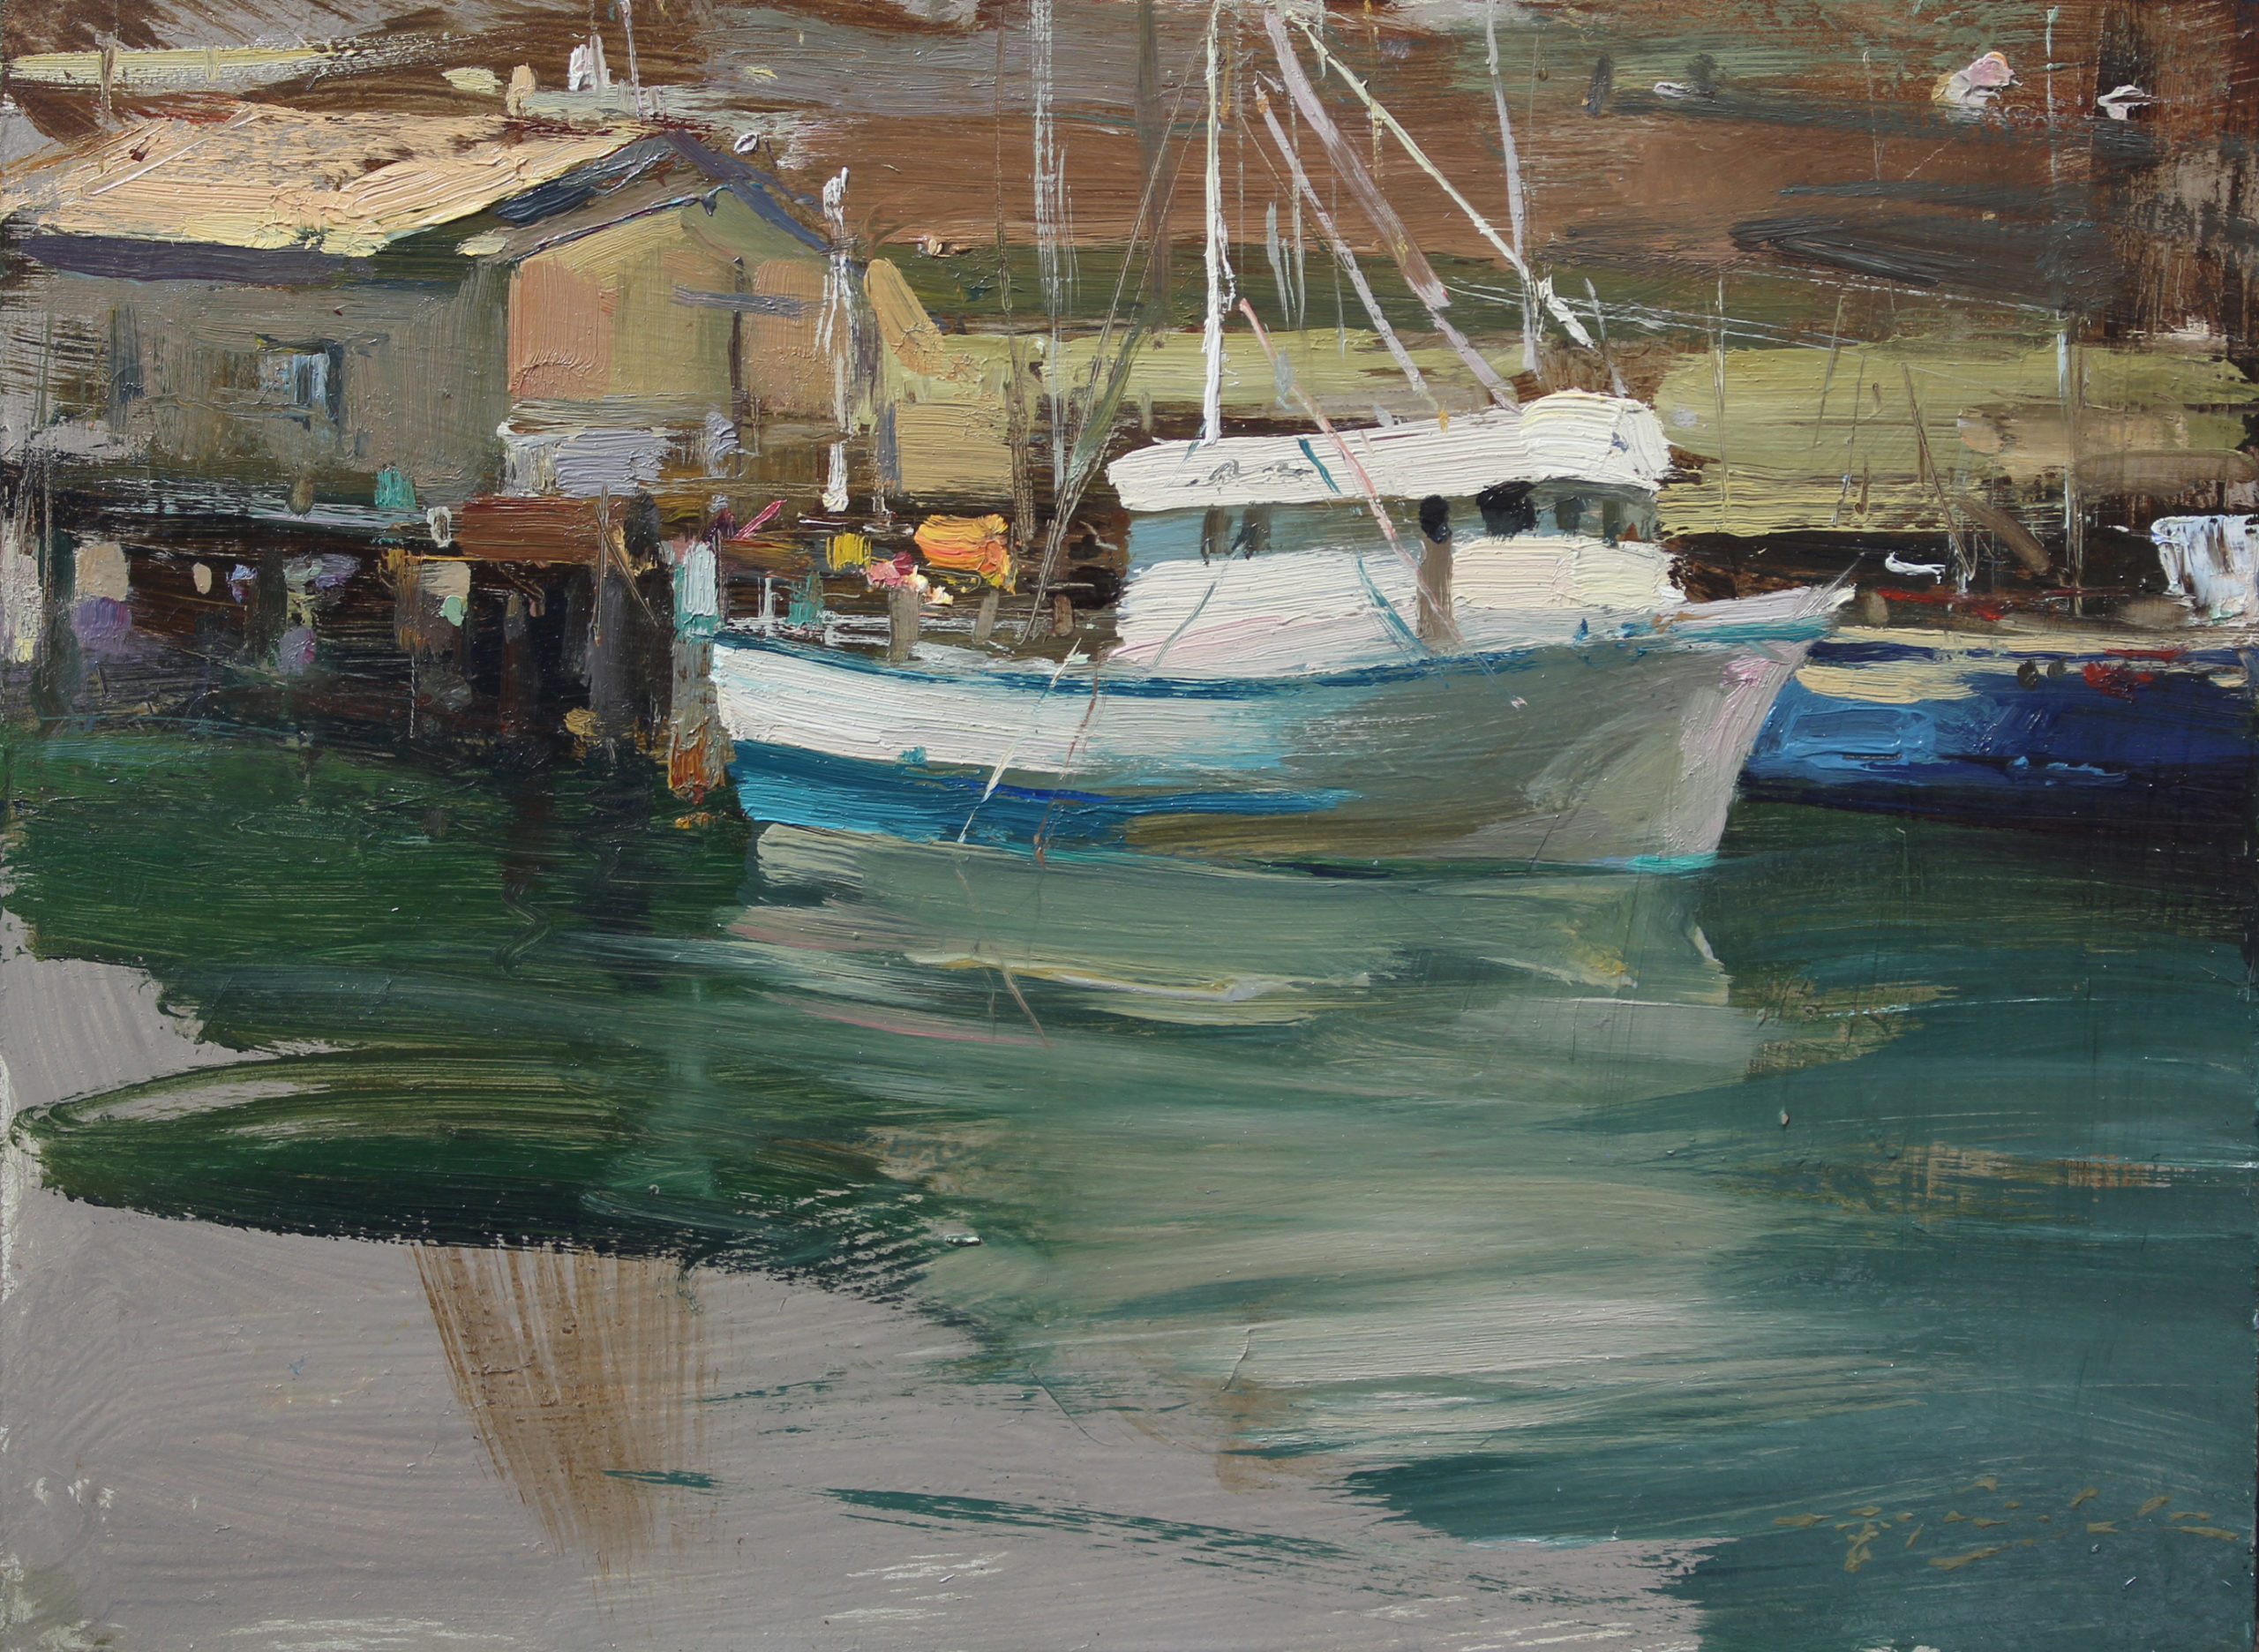 "Fishermens Wharf" (2017, oil on panel, 9 x 12 in.) by Hsin-Yao Tseng